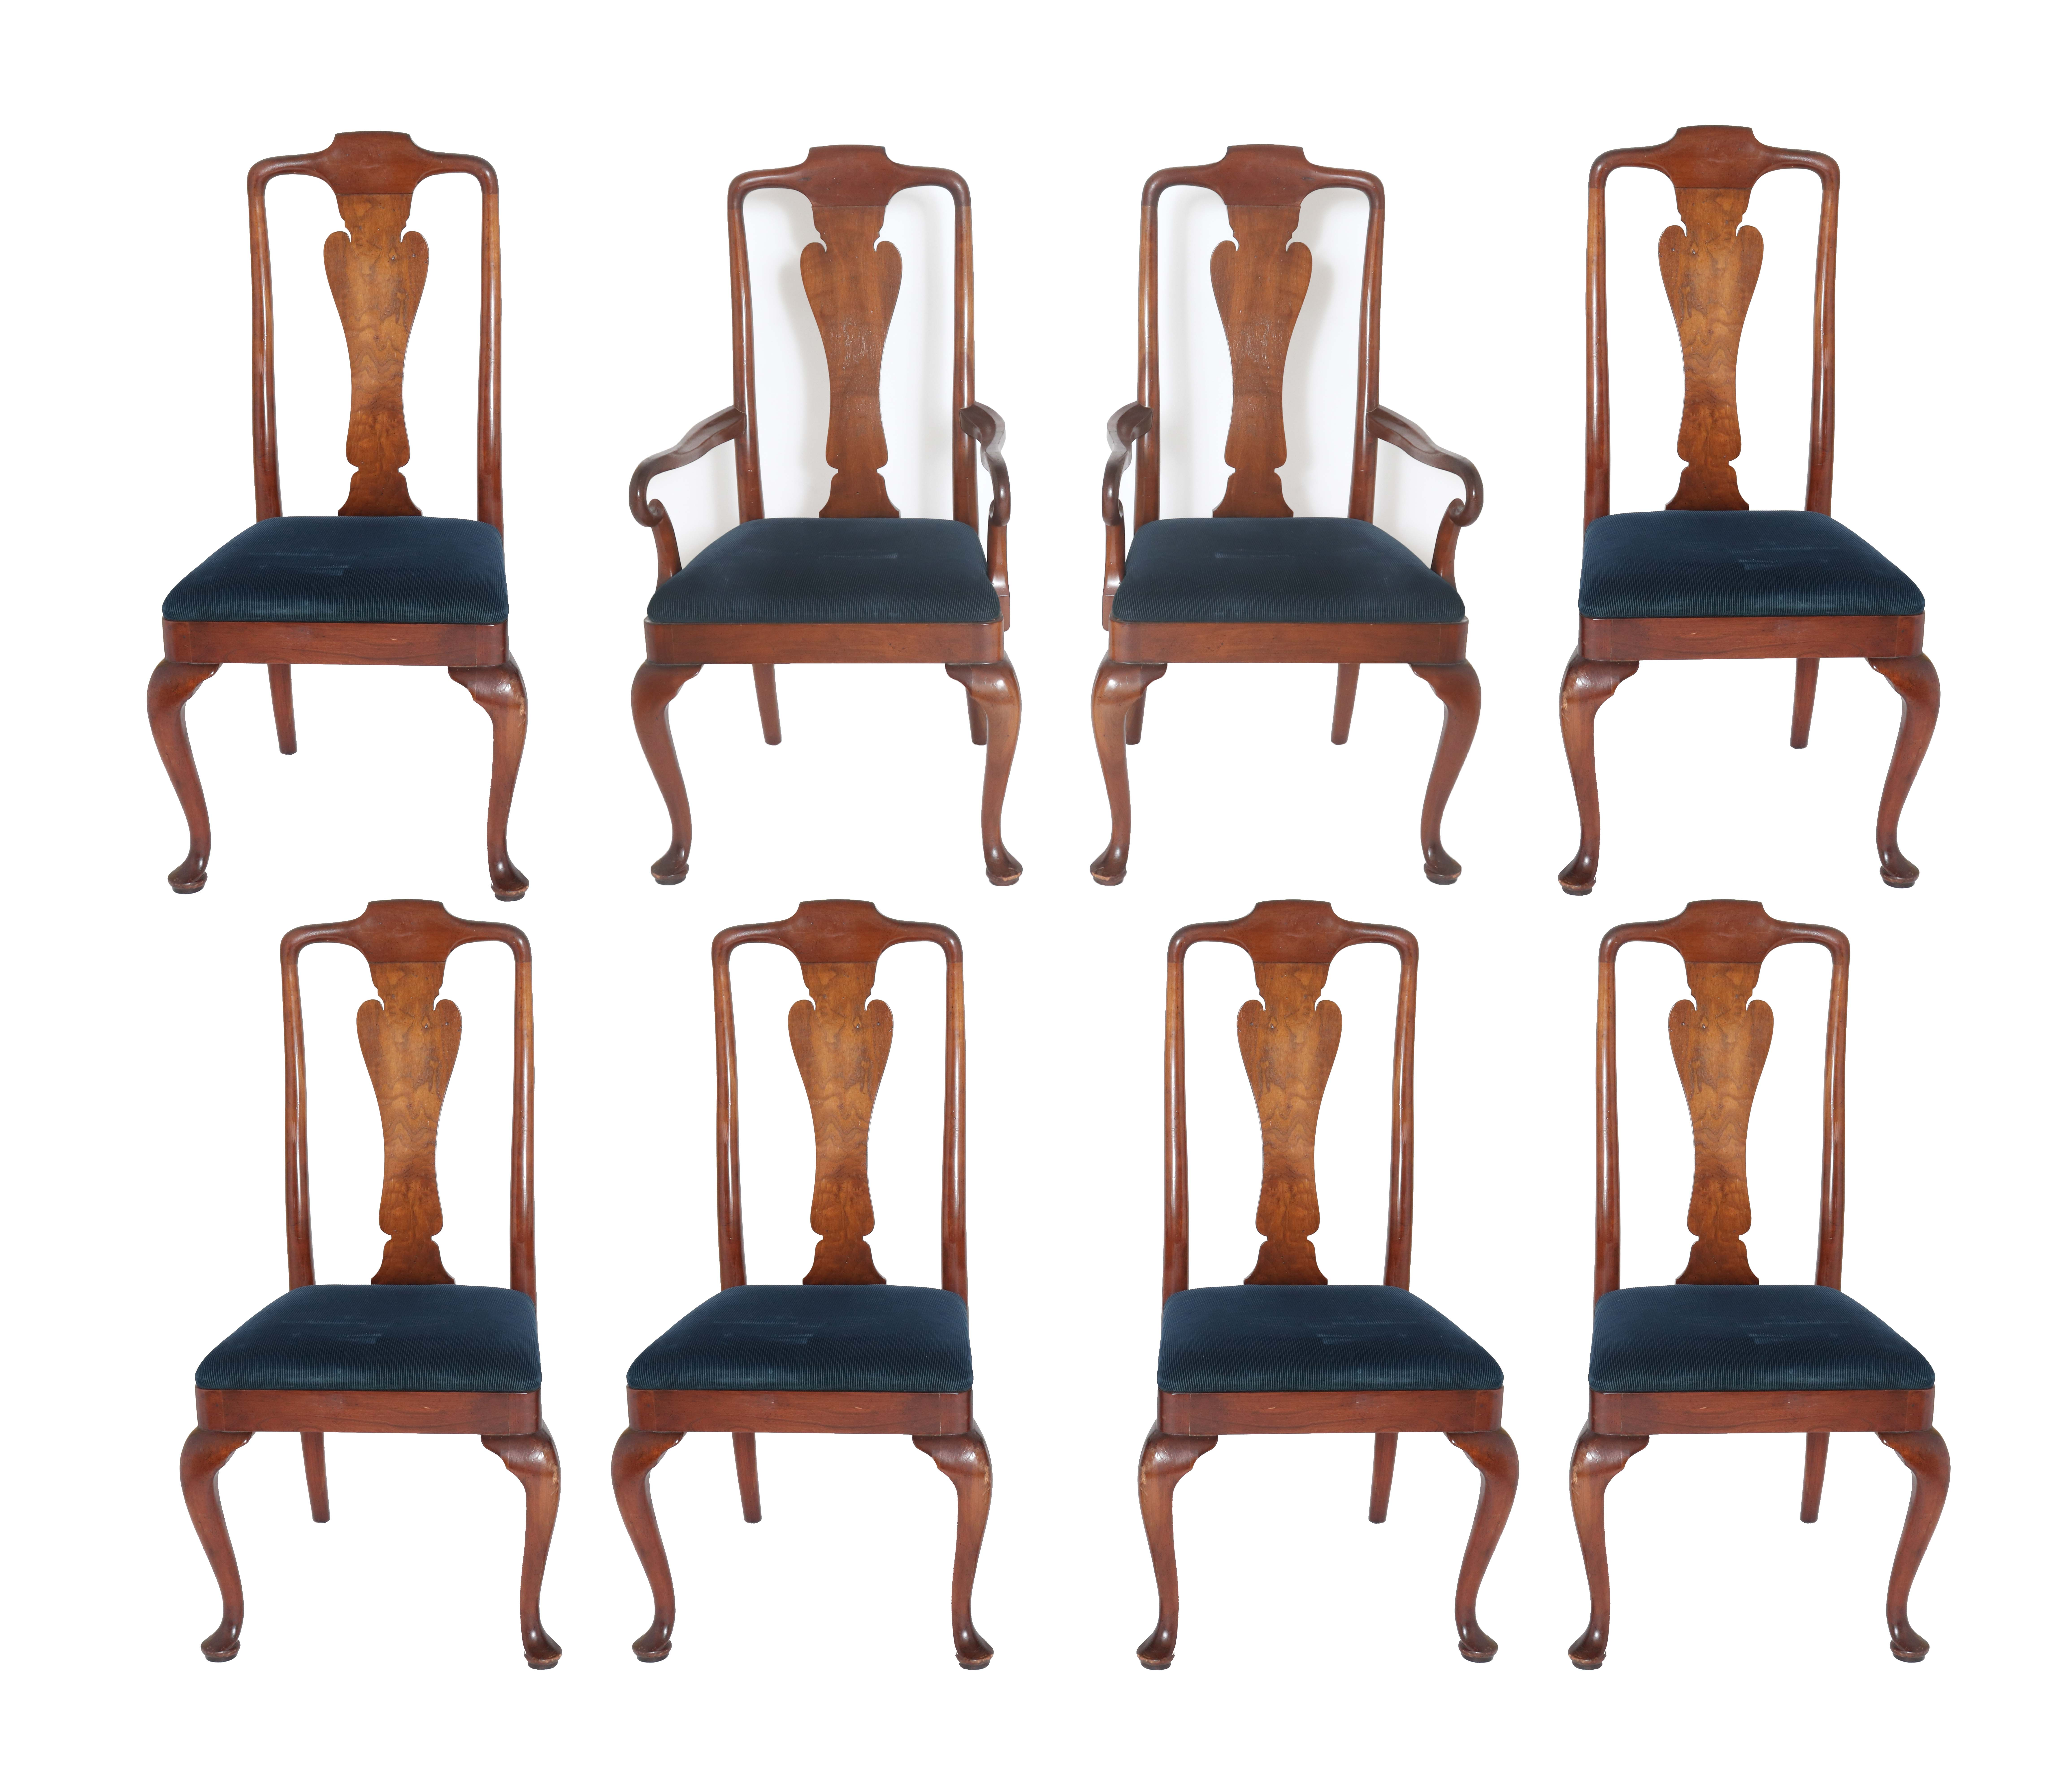 QUEEN ANNE STYLE DINING CHAIRS  3c38f1